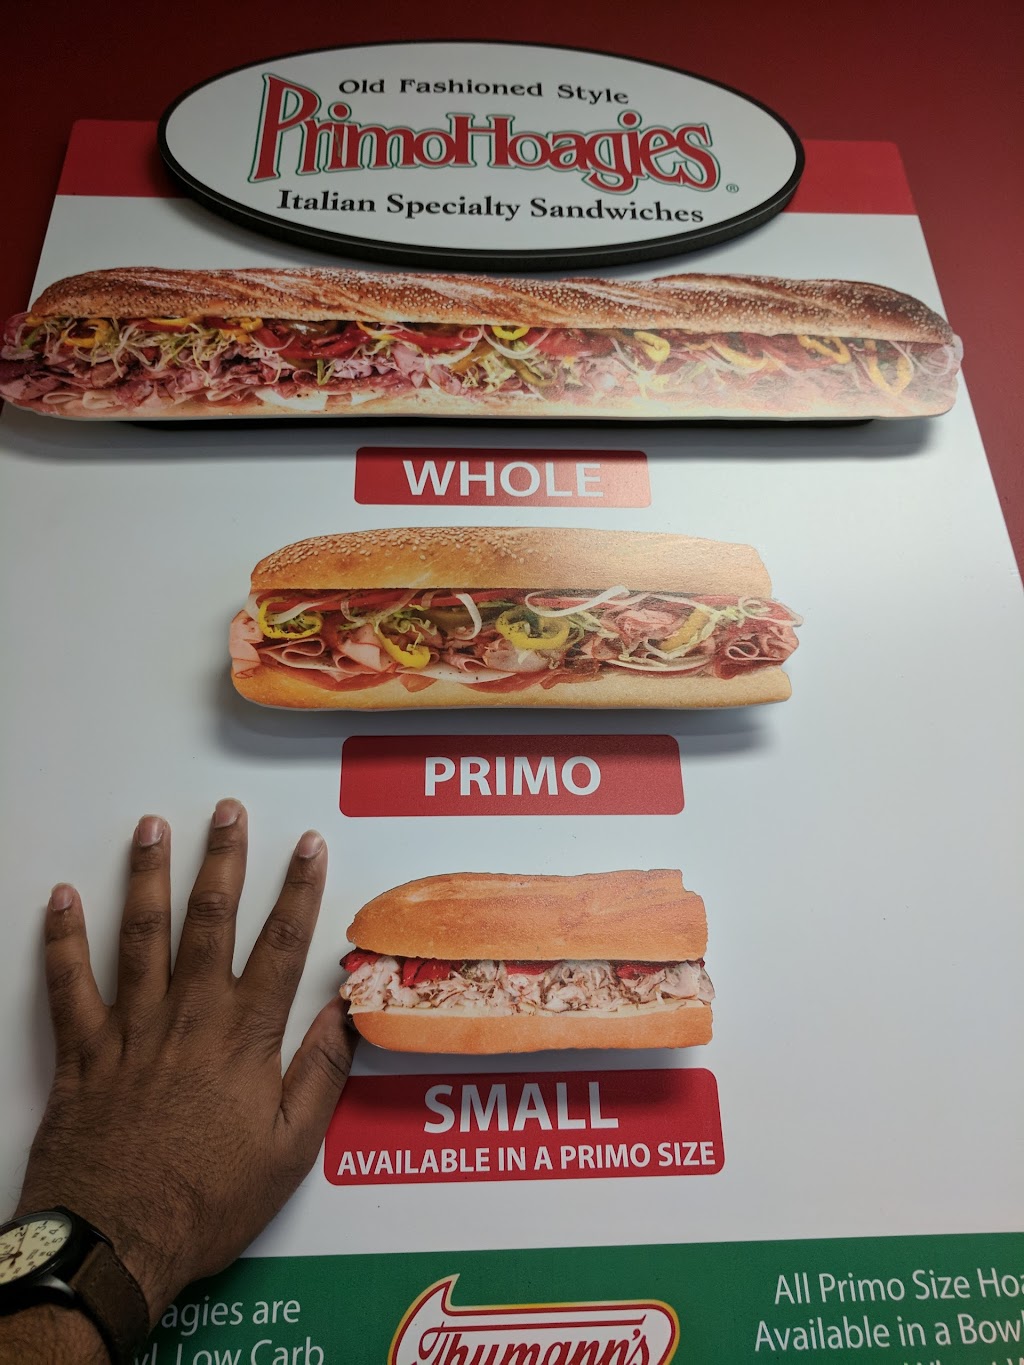 PrimoHoagies | 210 Pennbrook Pkwy, Lansdale, PA 19446 | Phone: (215) 361-2490